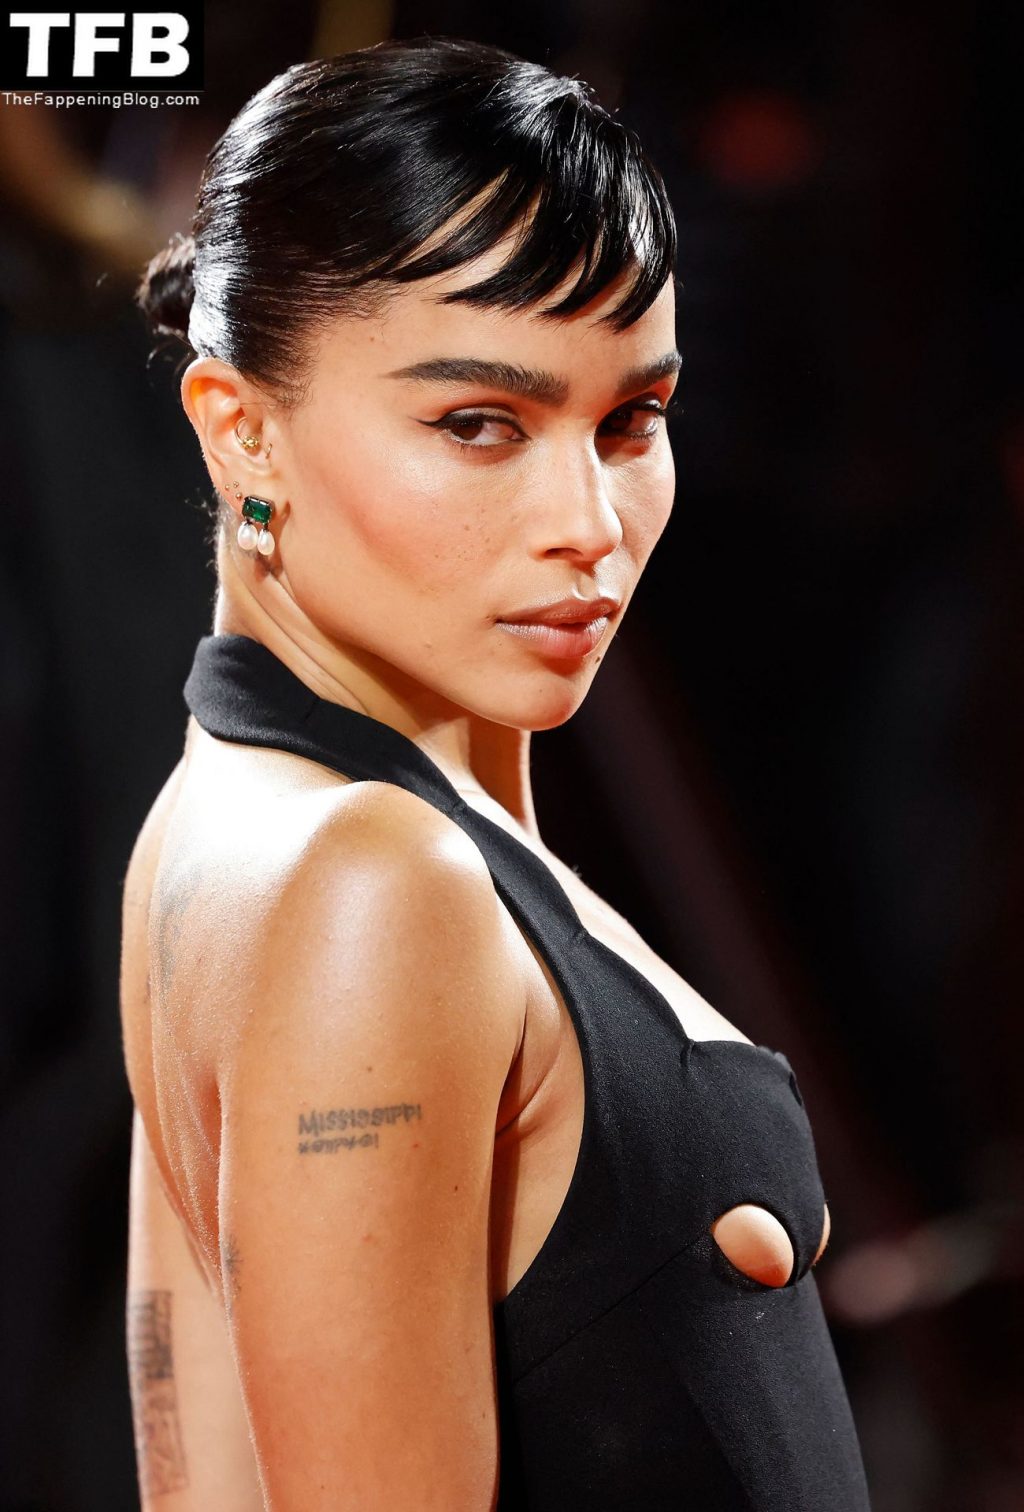 Zoe Kravitz Sexy The Fappening Blog 3 1024x1512 - Zoe Kravitz Shows Off Her Sexy Tits at ‘The Batman’ Movie Premiere in London (38 Photos)